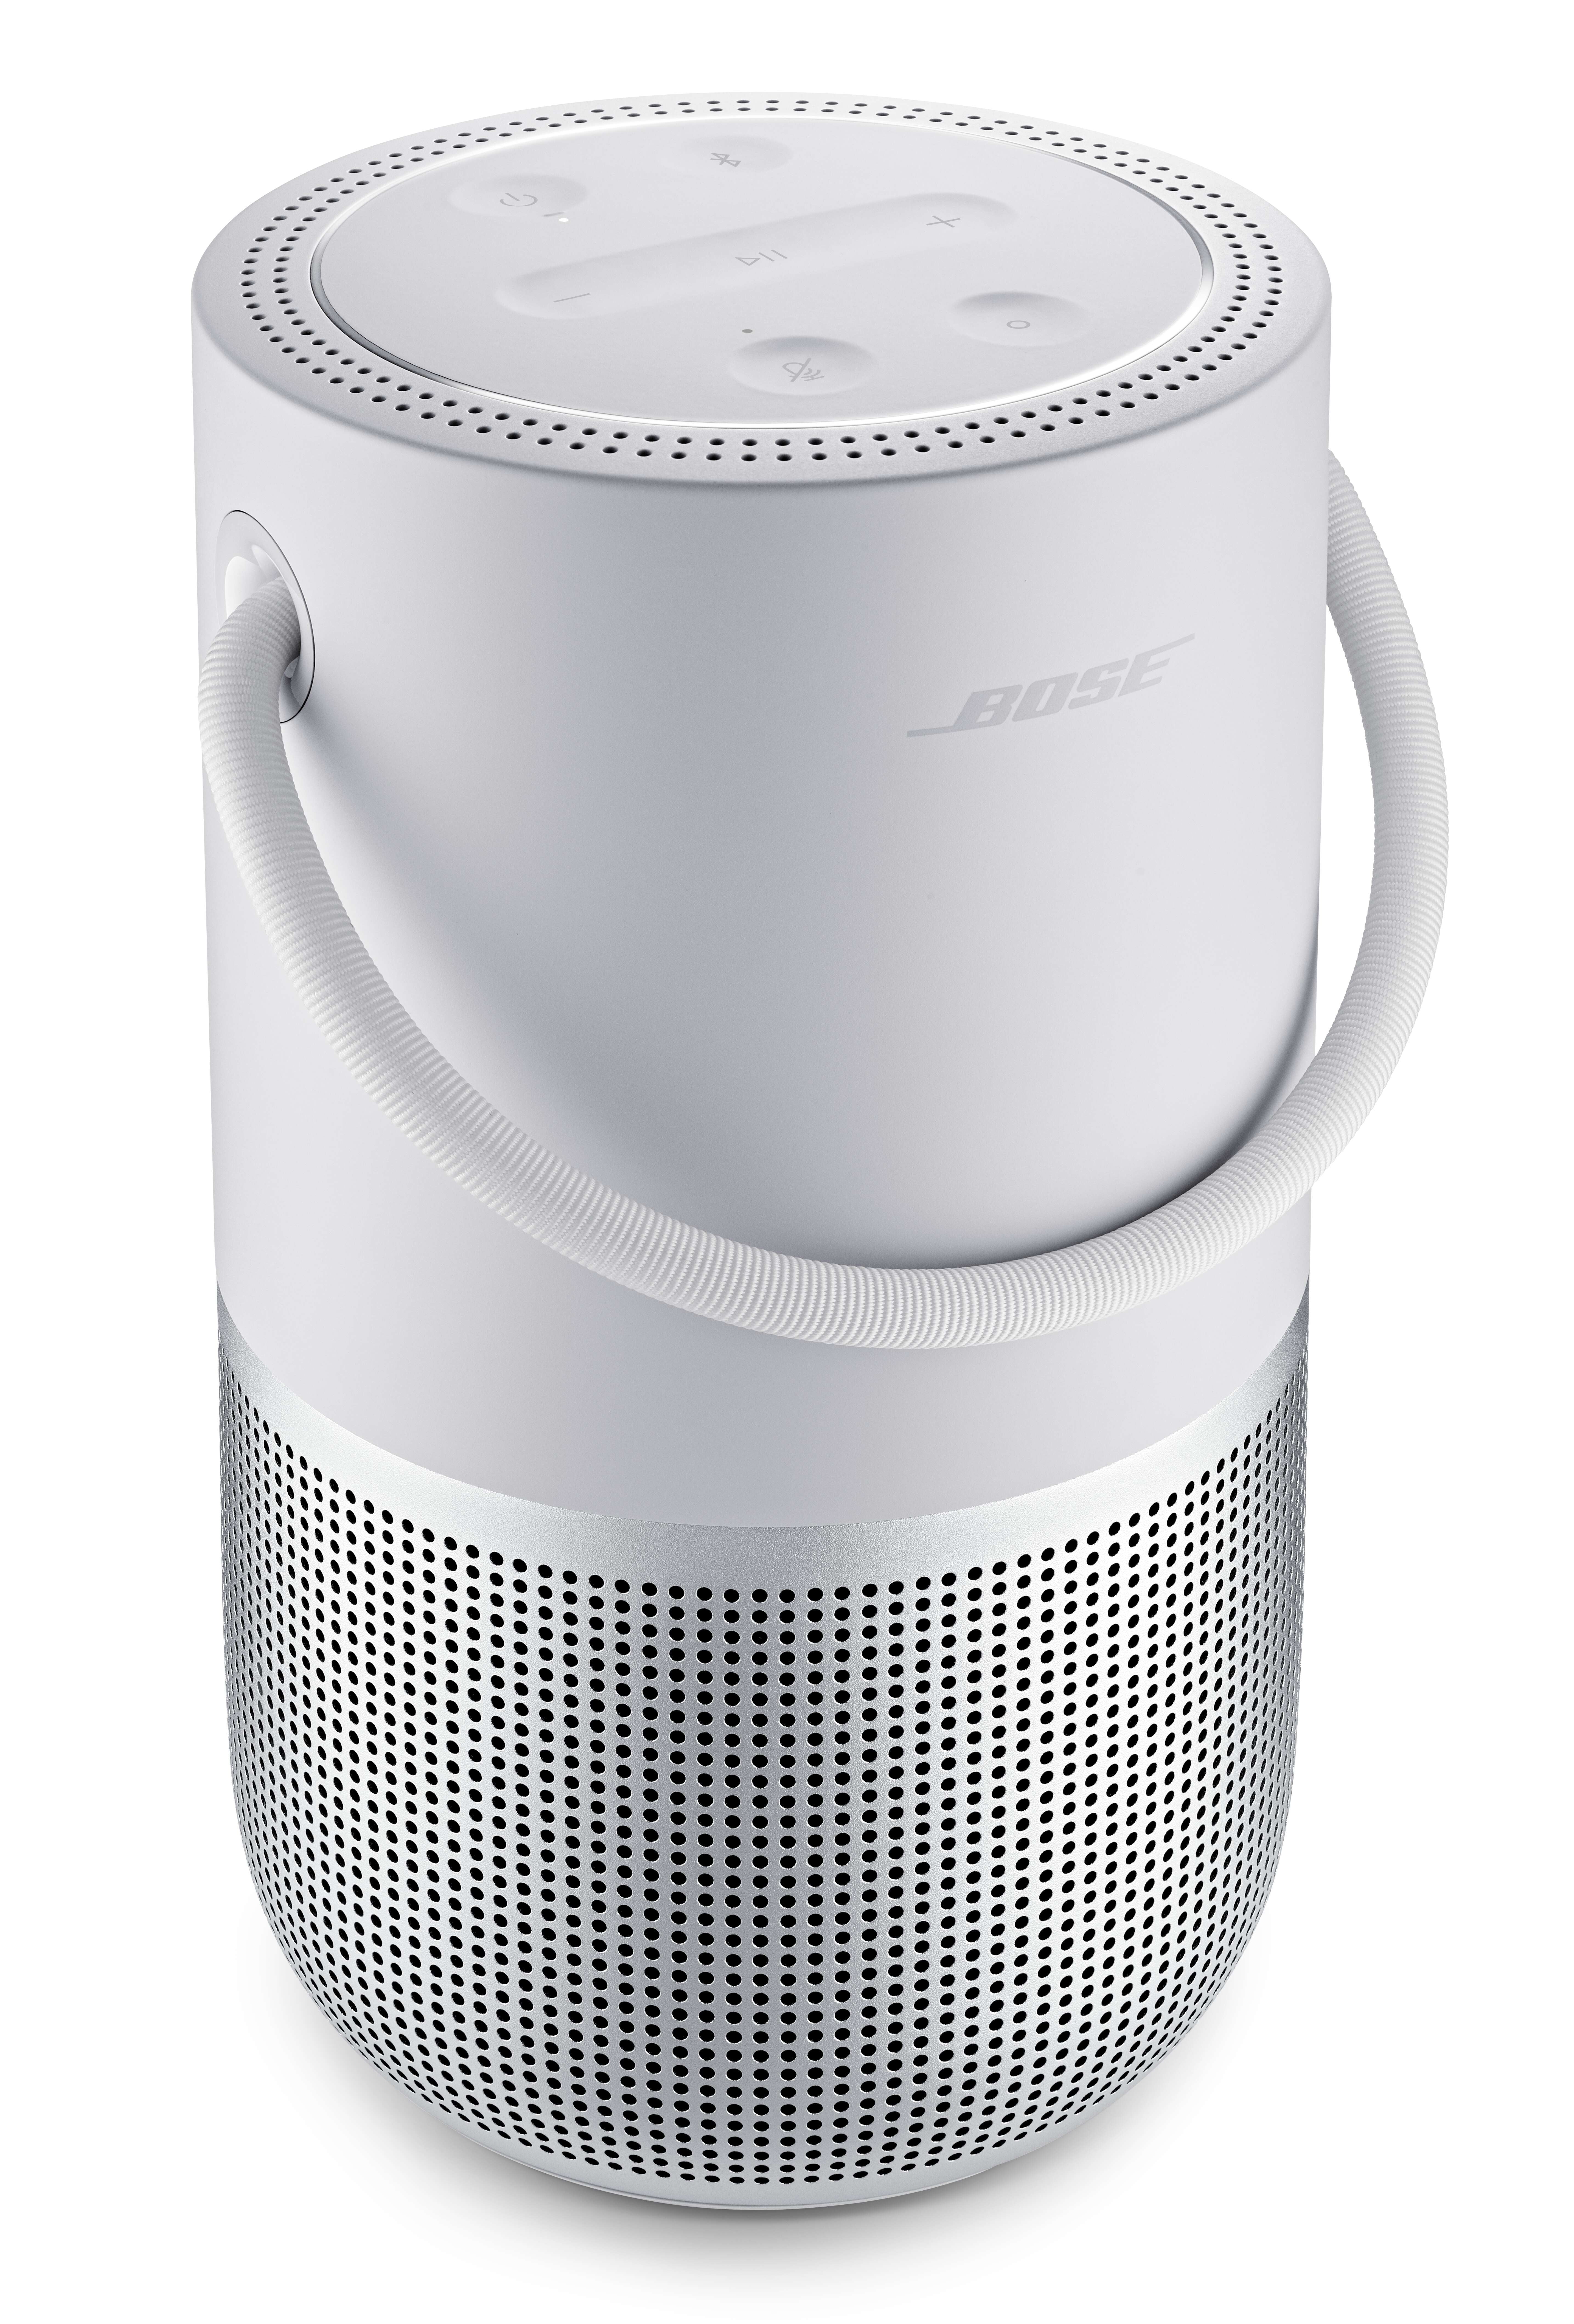 Bose Portable Smart Speaker with Wi-Fi, Bluetooth and Voice Control  Built-in, Silver